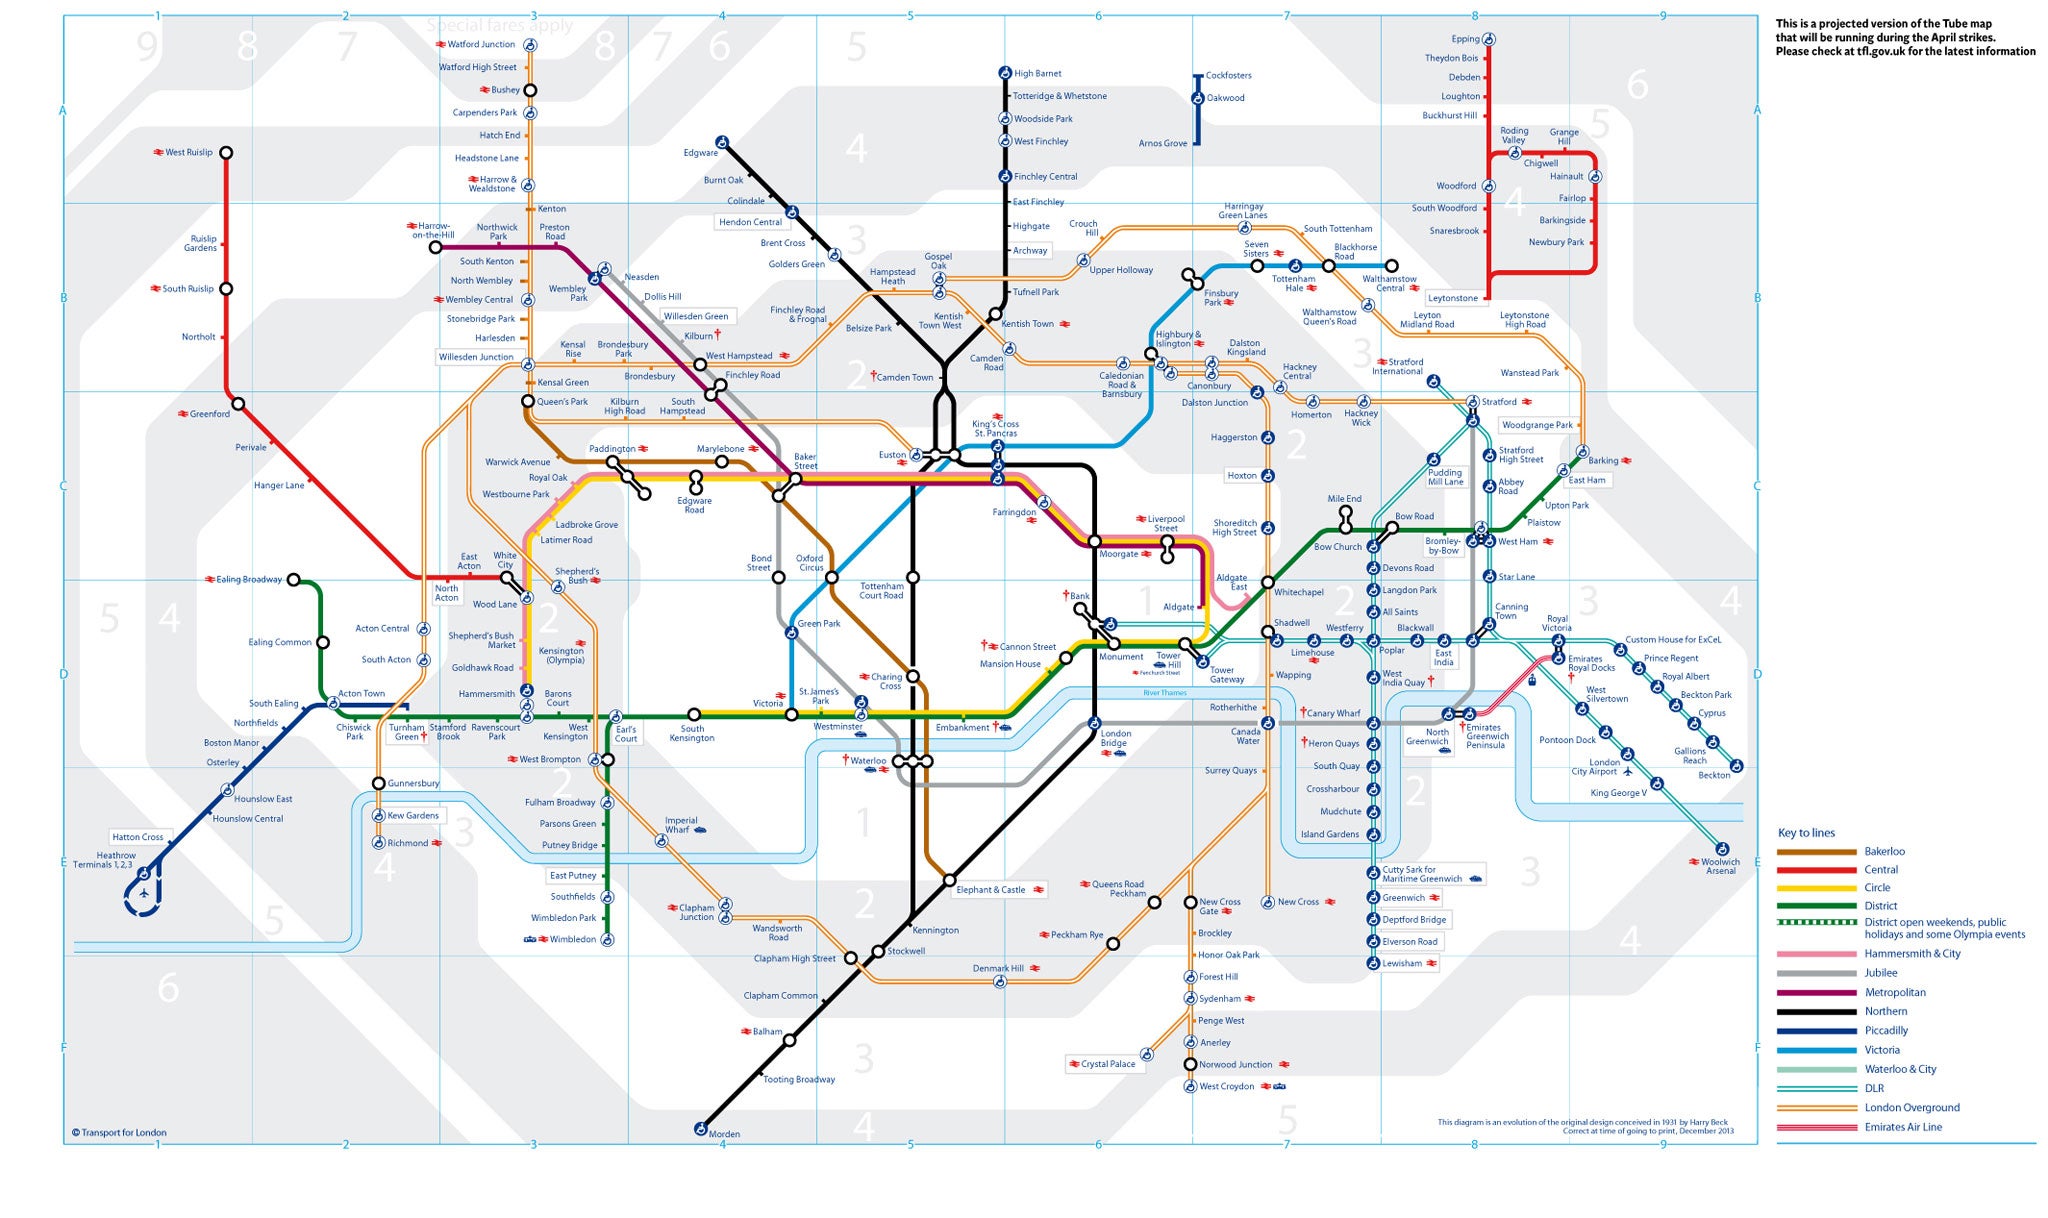 What the London Underground is predicted to look like during the strike (click to enlarge)